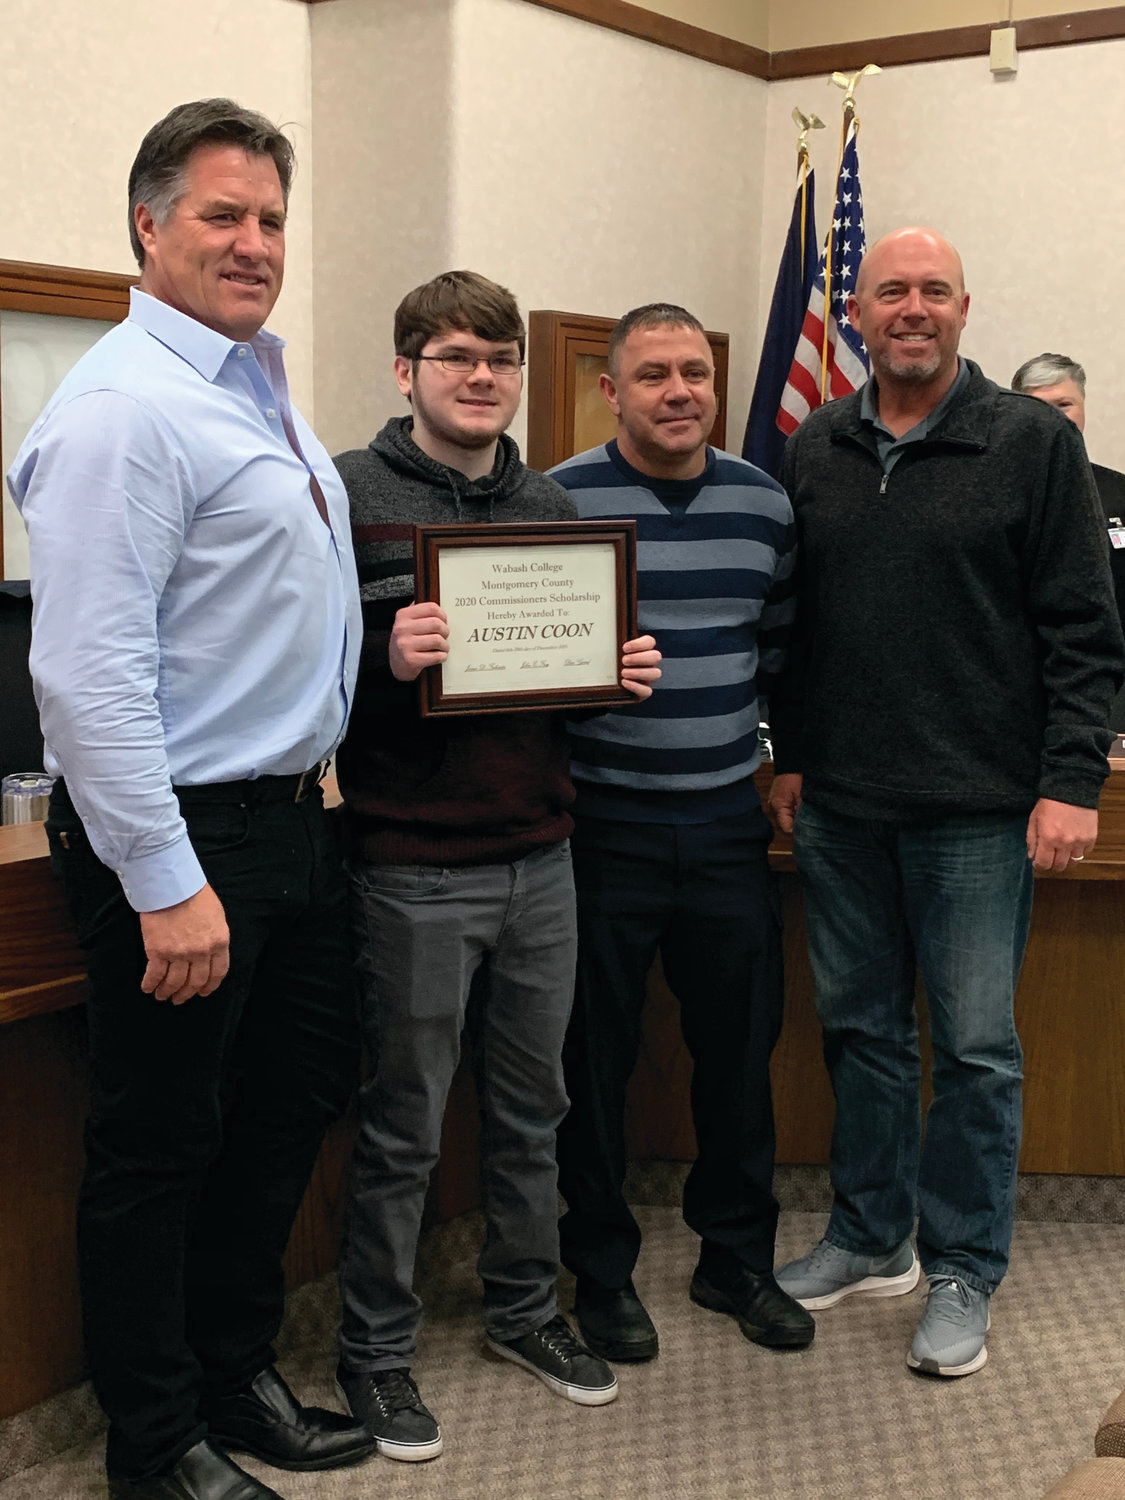 Southmont High School student Austin Coon, second from left, is presented with the Wabash College/Montgomery County 2020 Commissioners Scholarship by commissioners John Frey, Jim Fulwider and Dan Guard Friday at the courthouse.